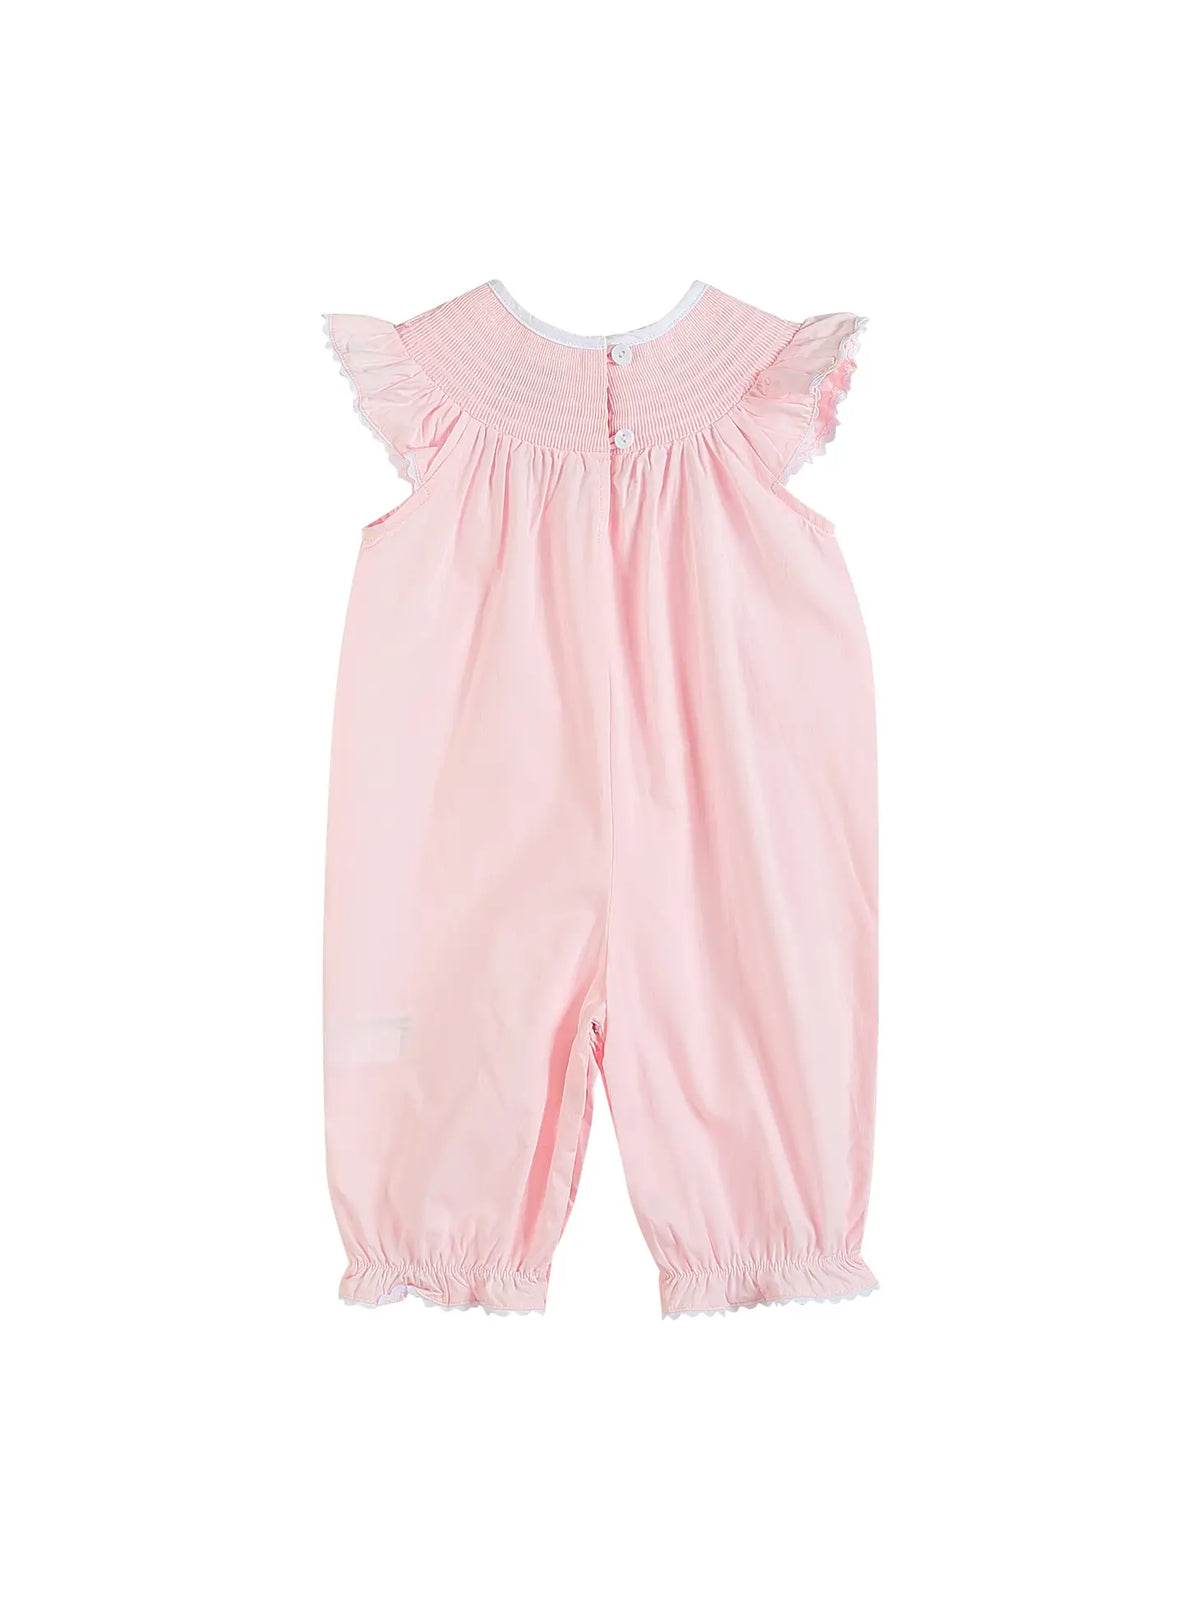 Light Pink Easter Bunny Smocked Baby Playsuit